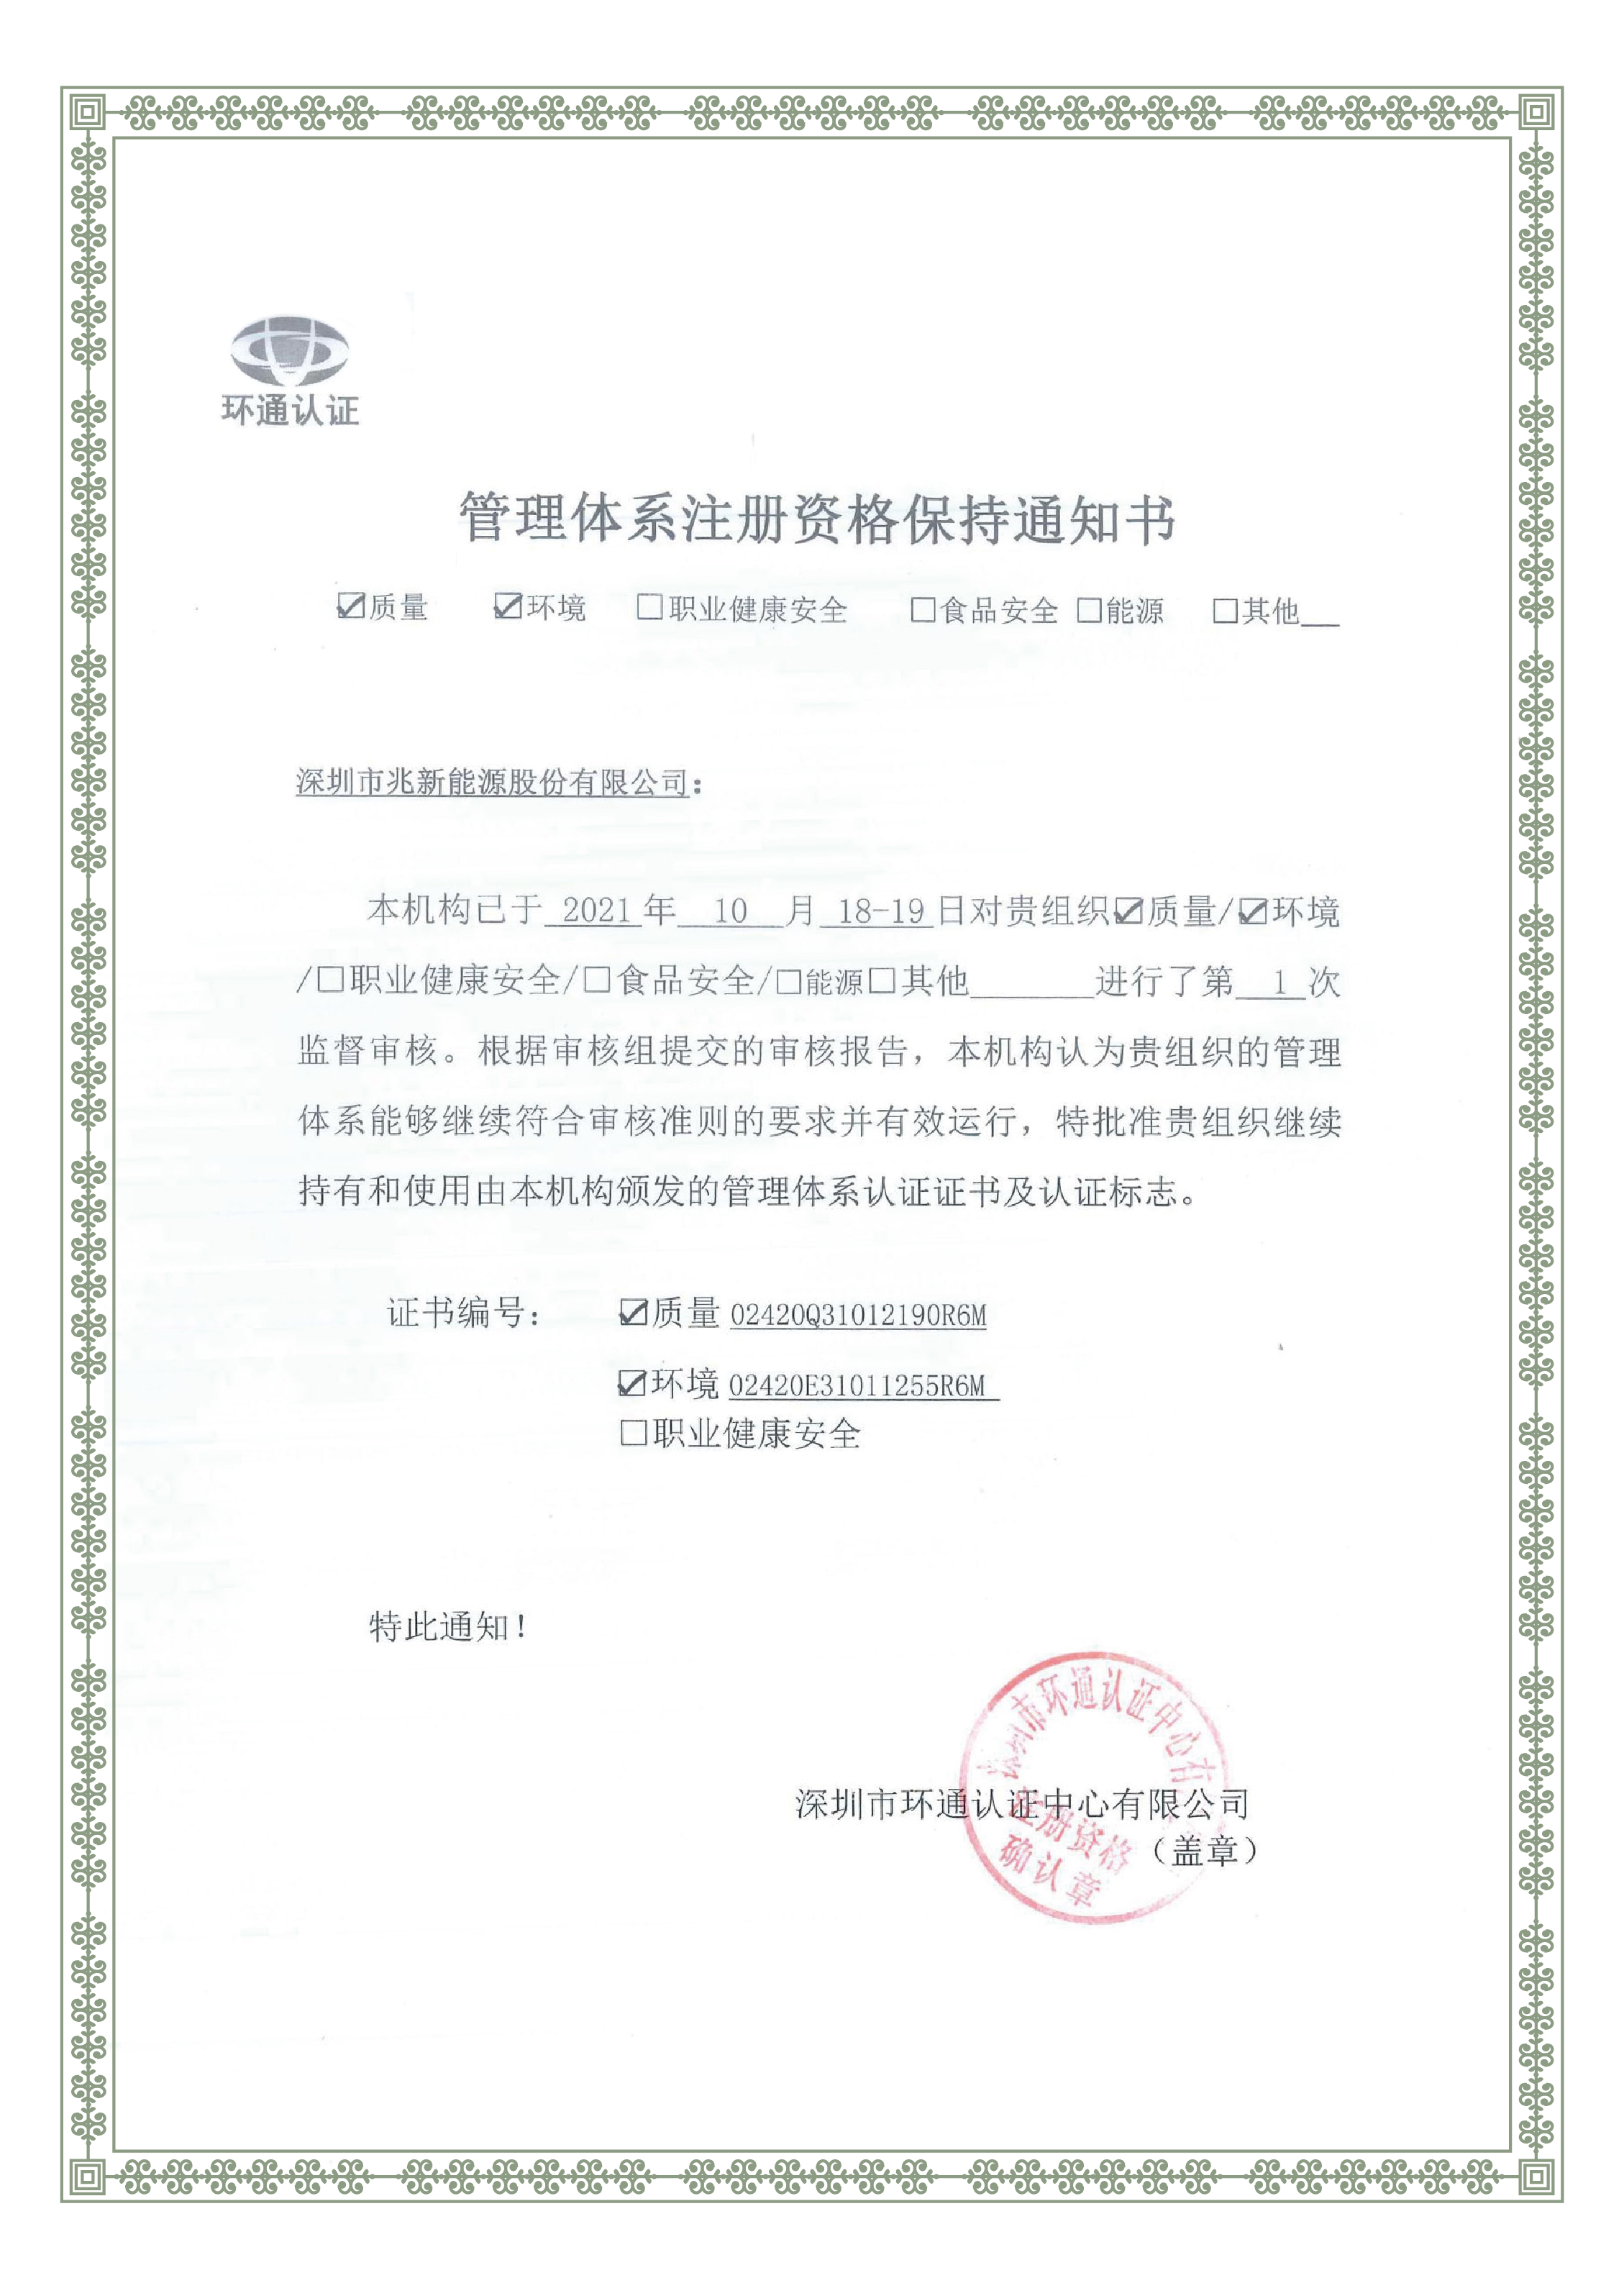 Shenzhen Sunrise New Energy Co.,ltd. Passed the Year of 2021 ISO9001 & ISO14001 Certification Review Again